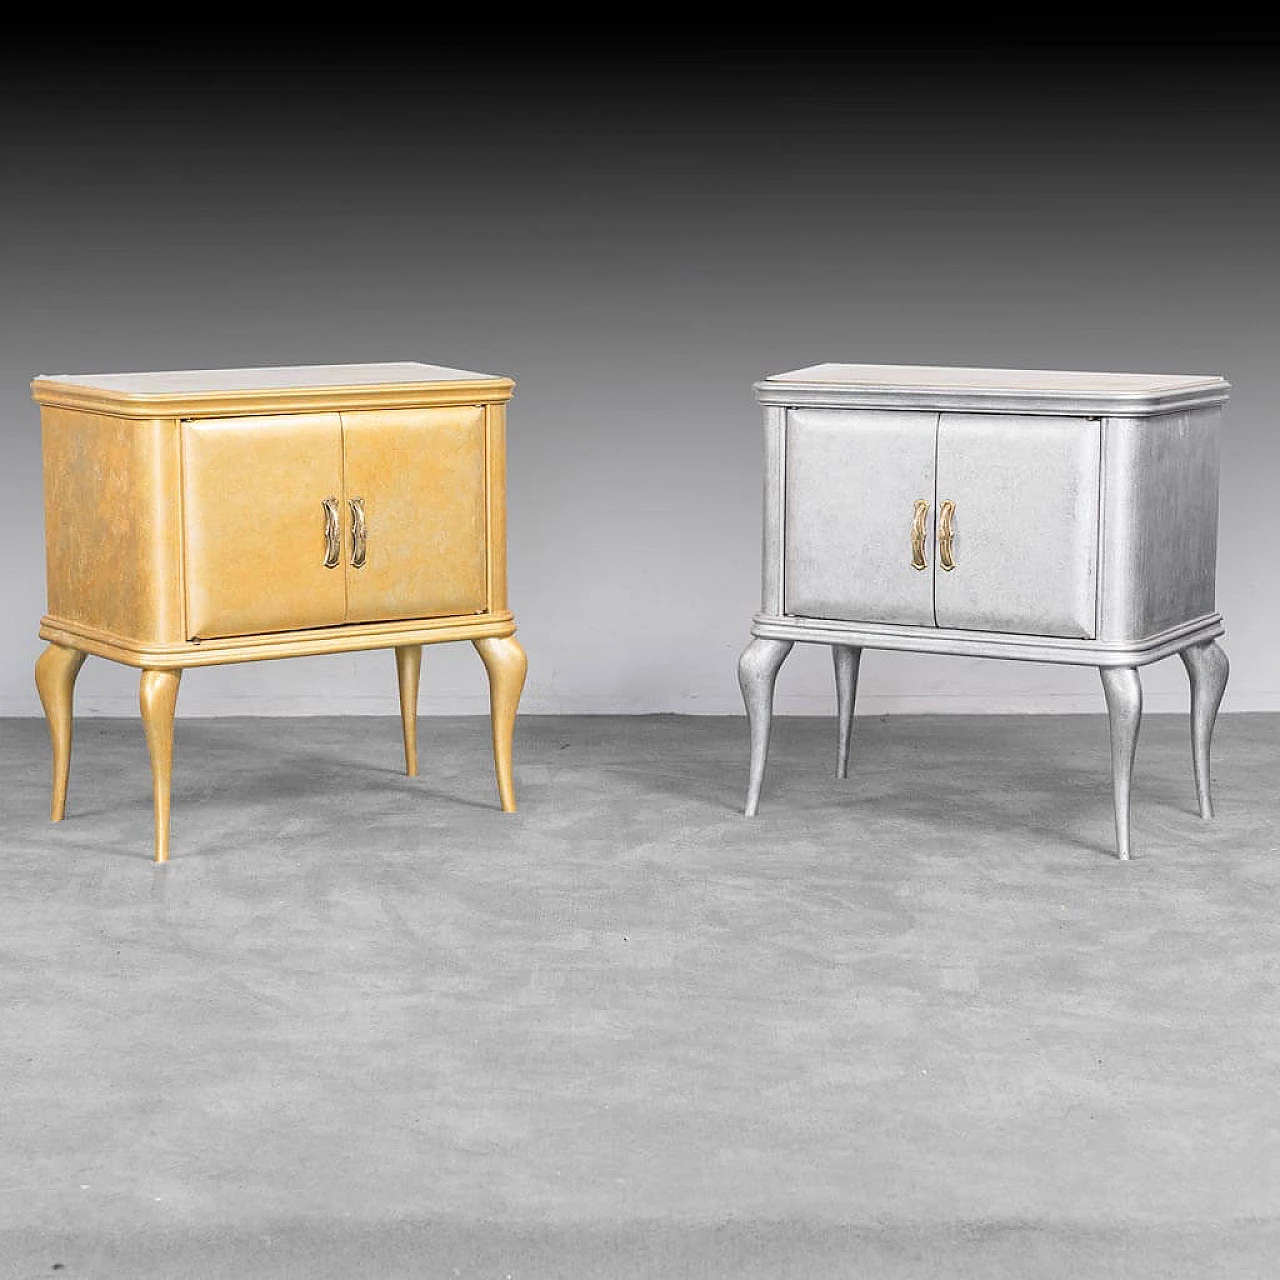 Pair of wooden bedside tables with glass top, 1950s 1377046